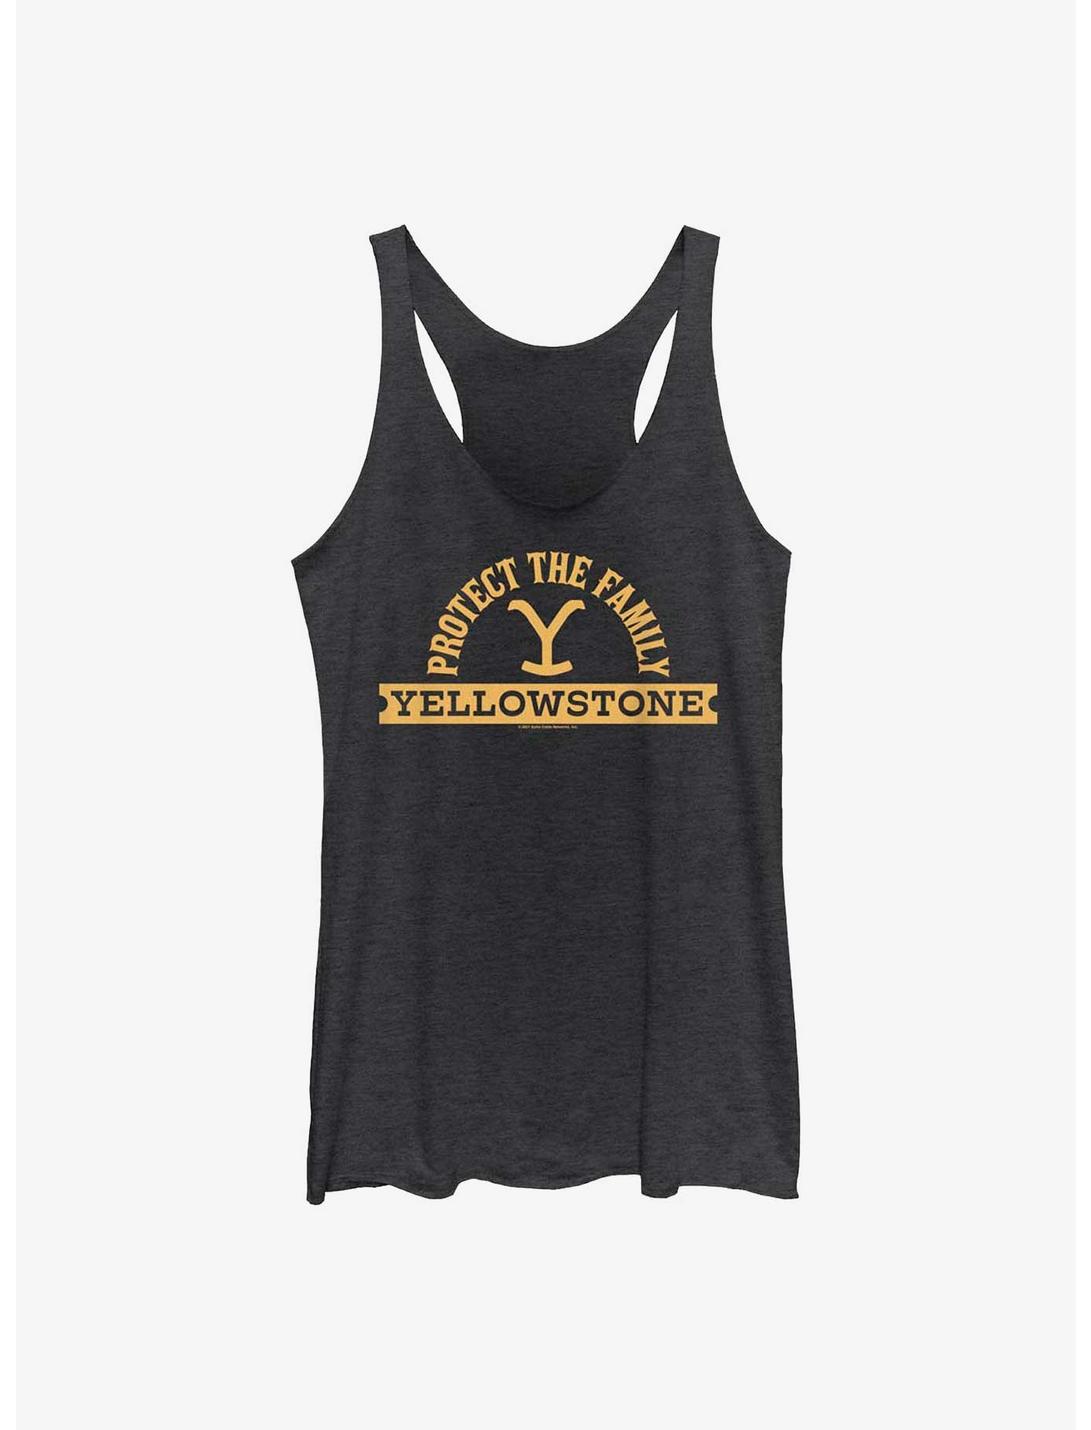 Yellowstone Protect The Family Womens Tank Top, BLK HTR, hi-res